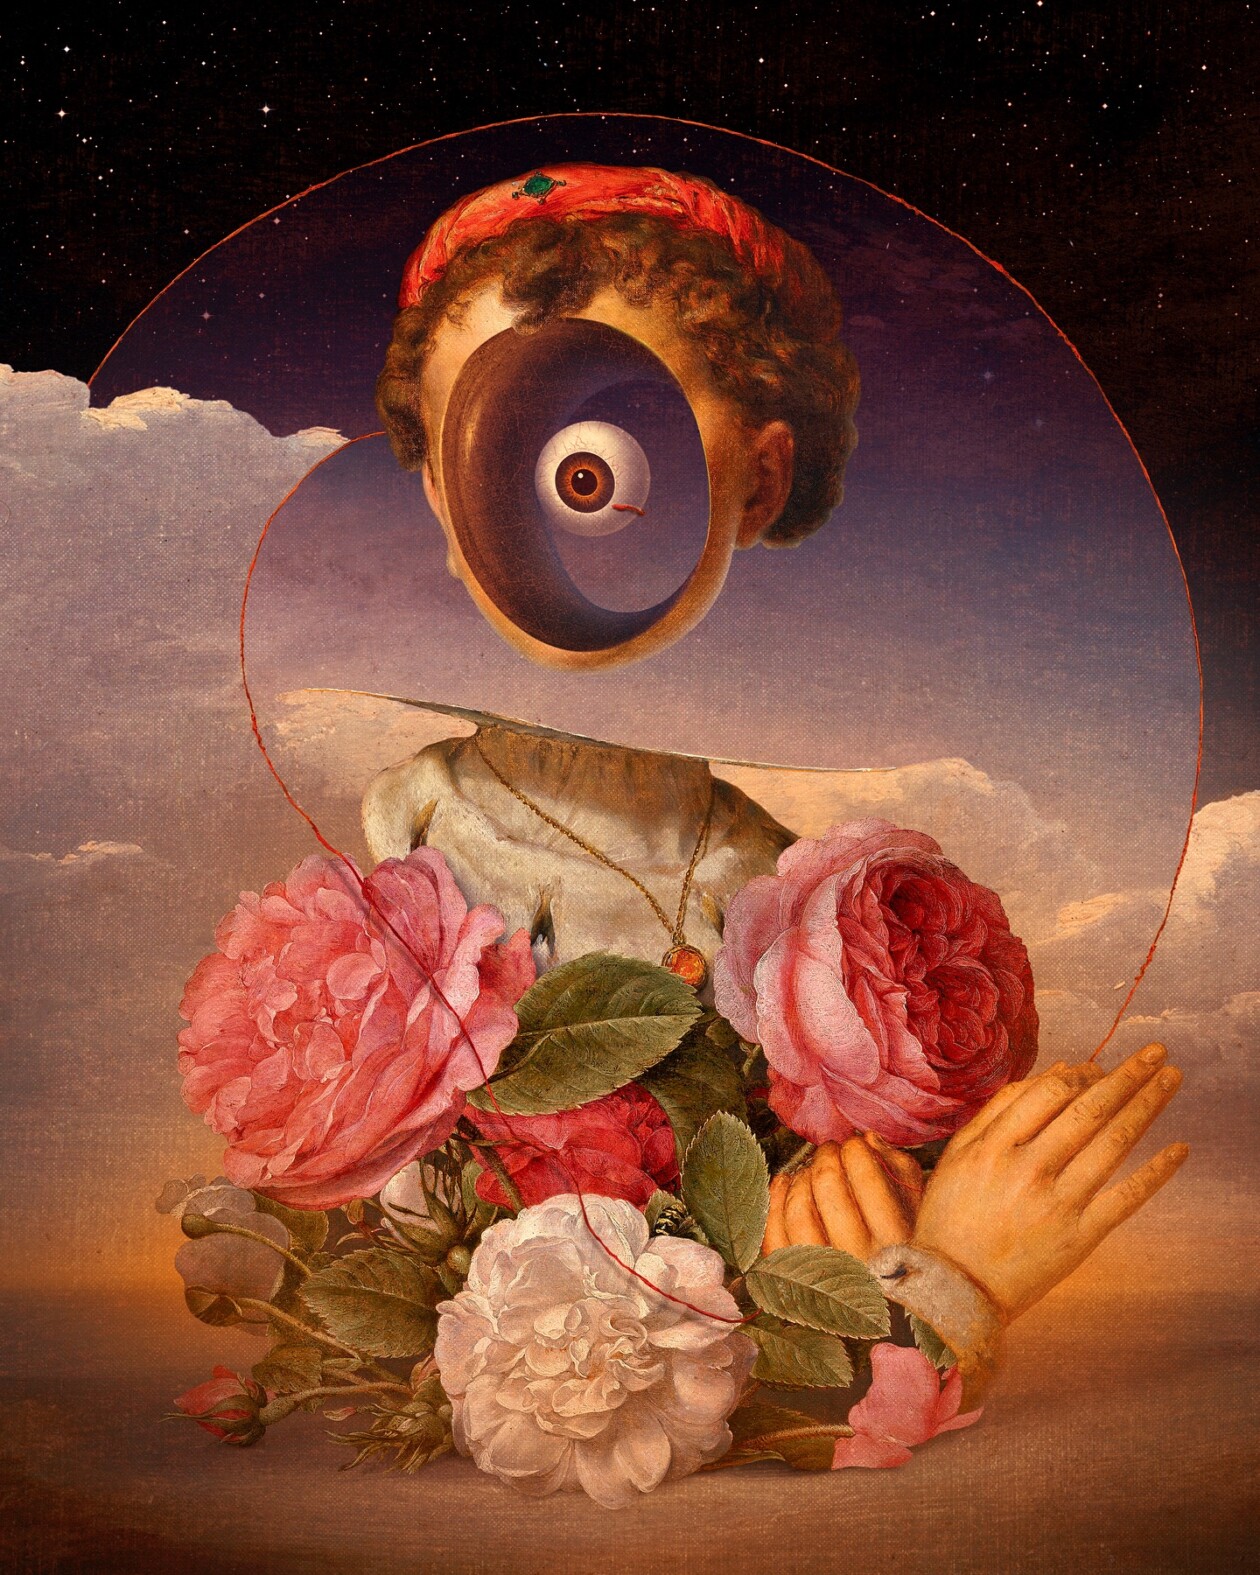 Dive Into The Surreal Digital Collages Of Mendez Mendez (5)